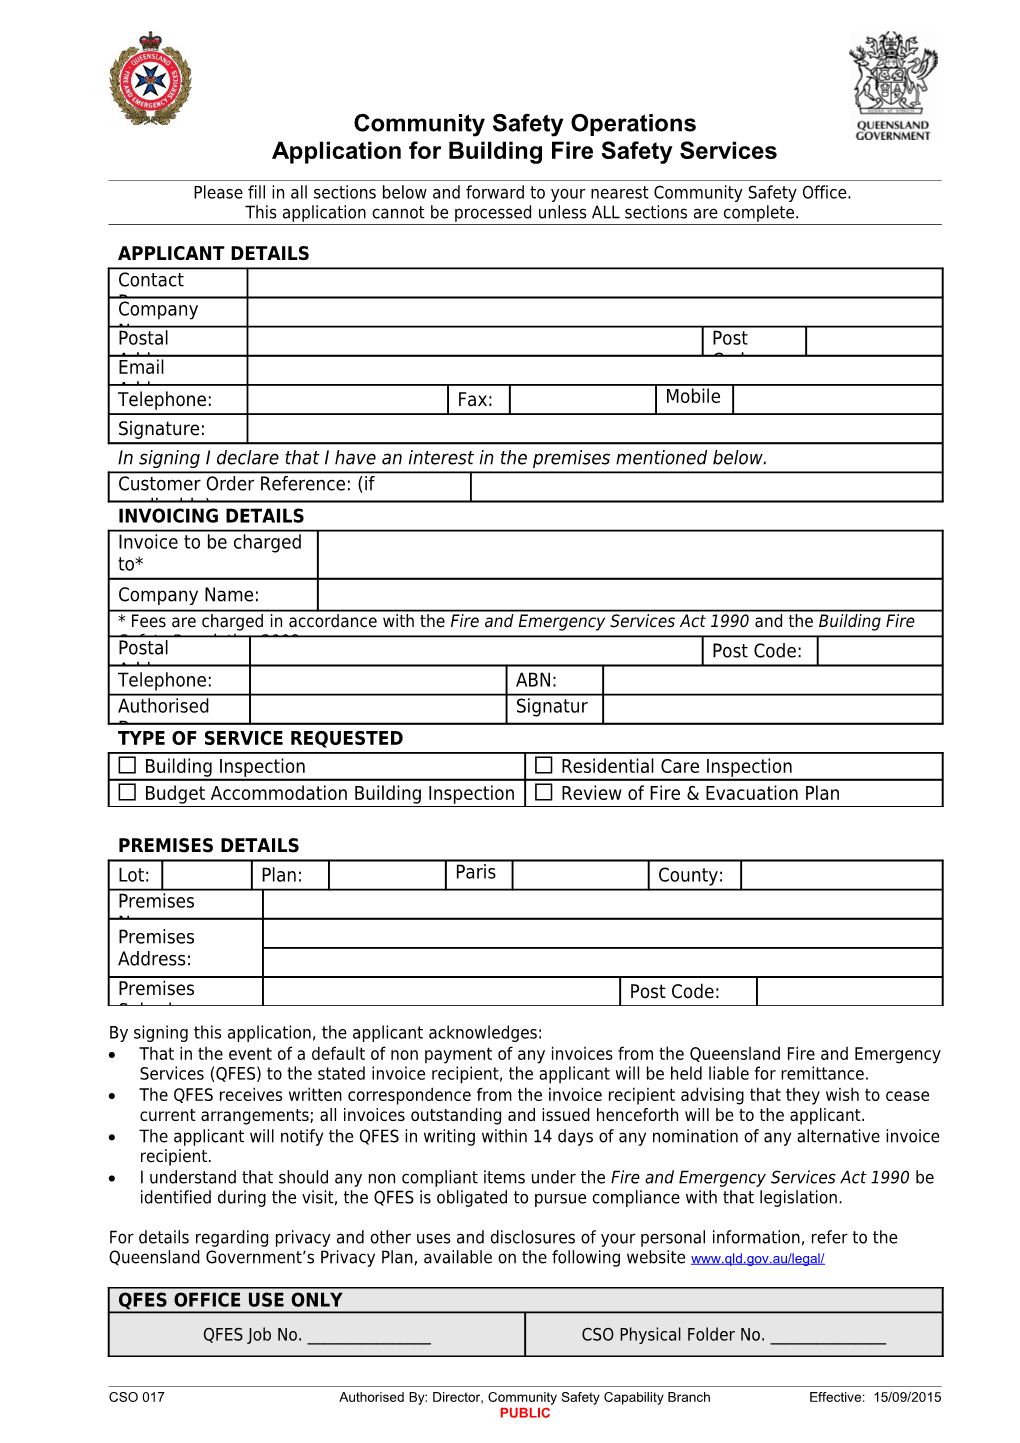 Application for Building Fire Safety Services